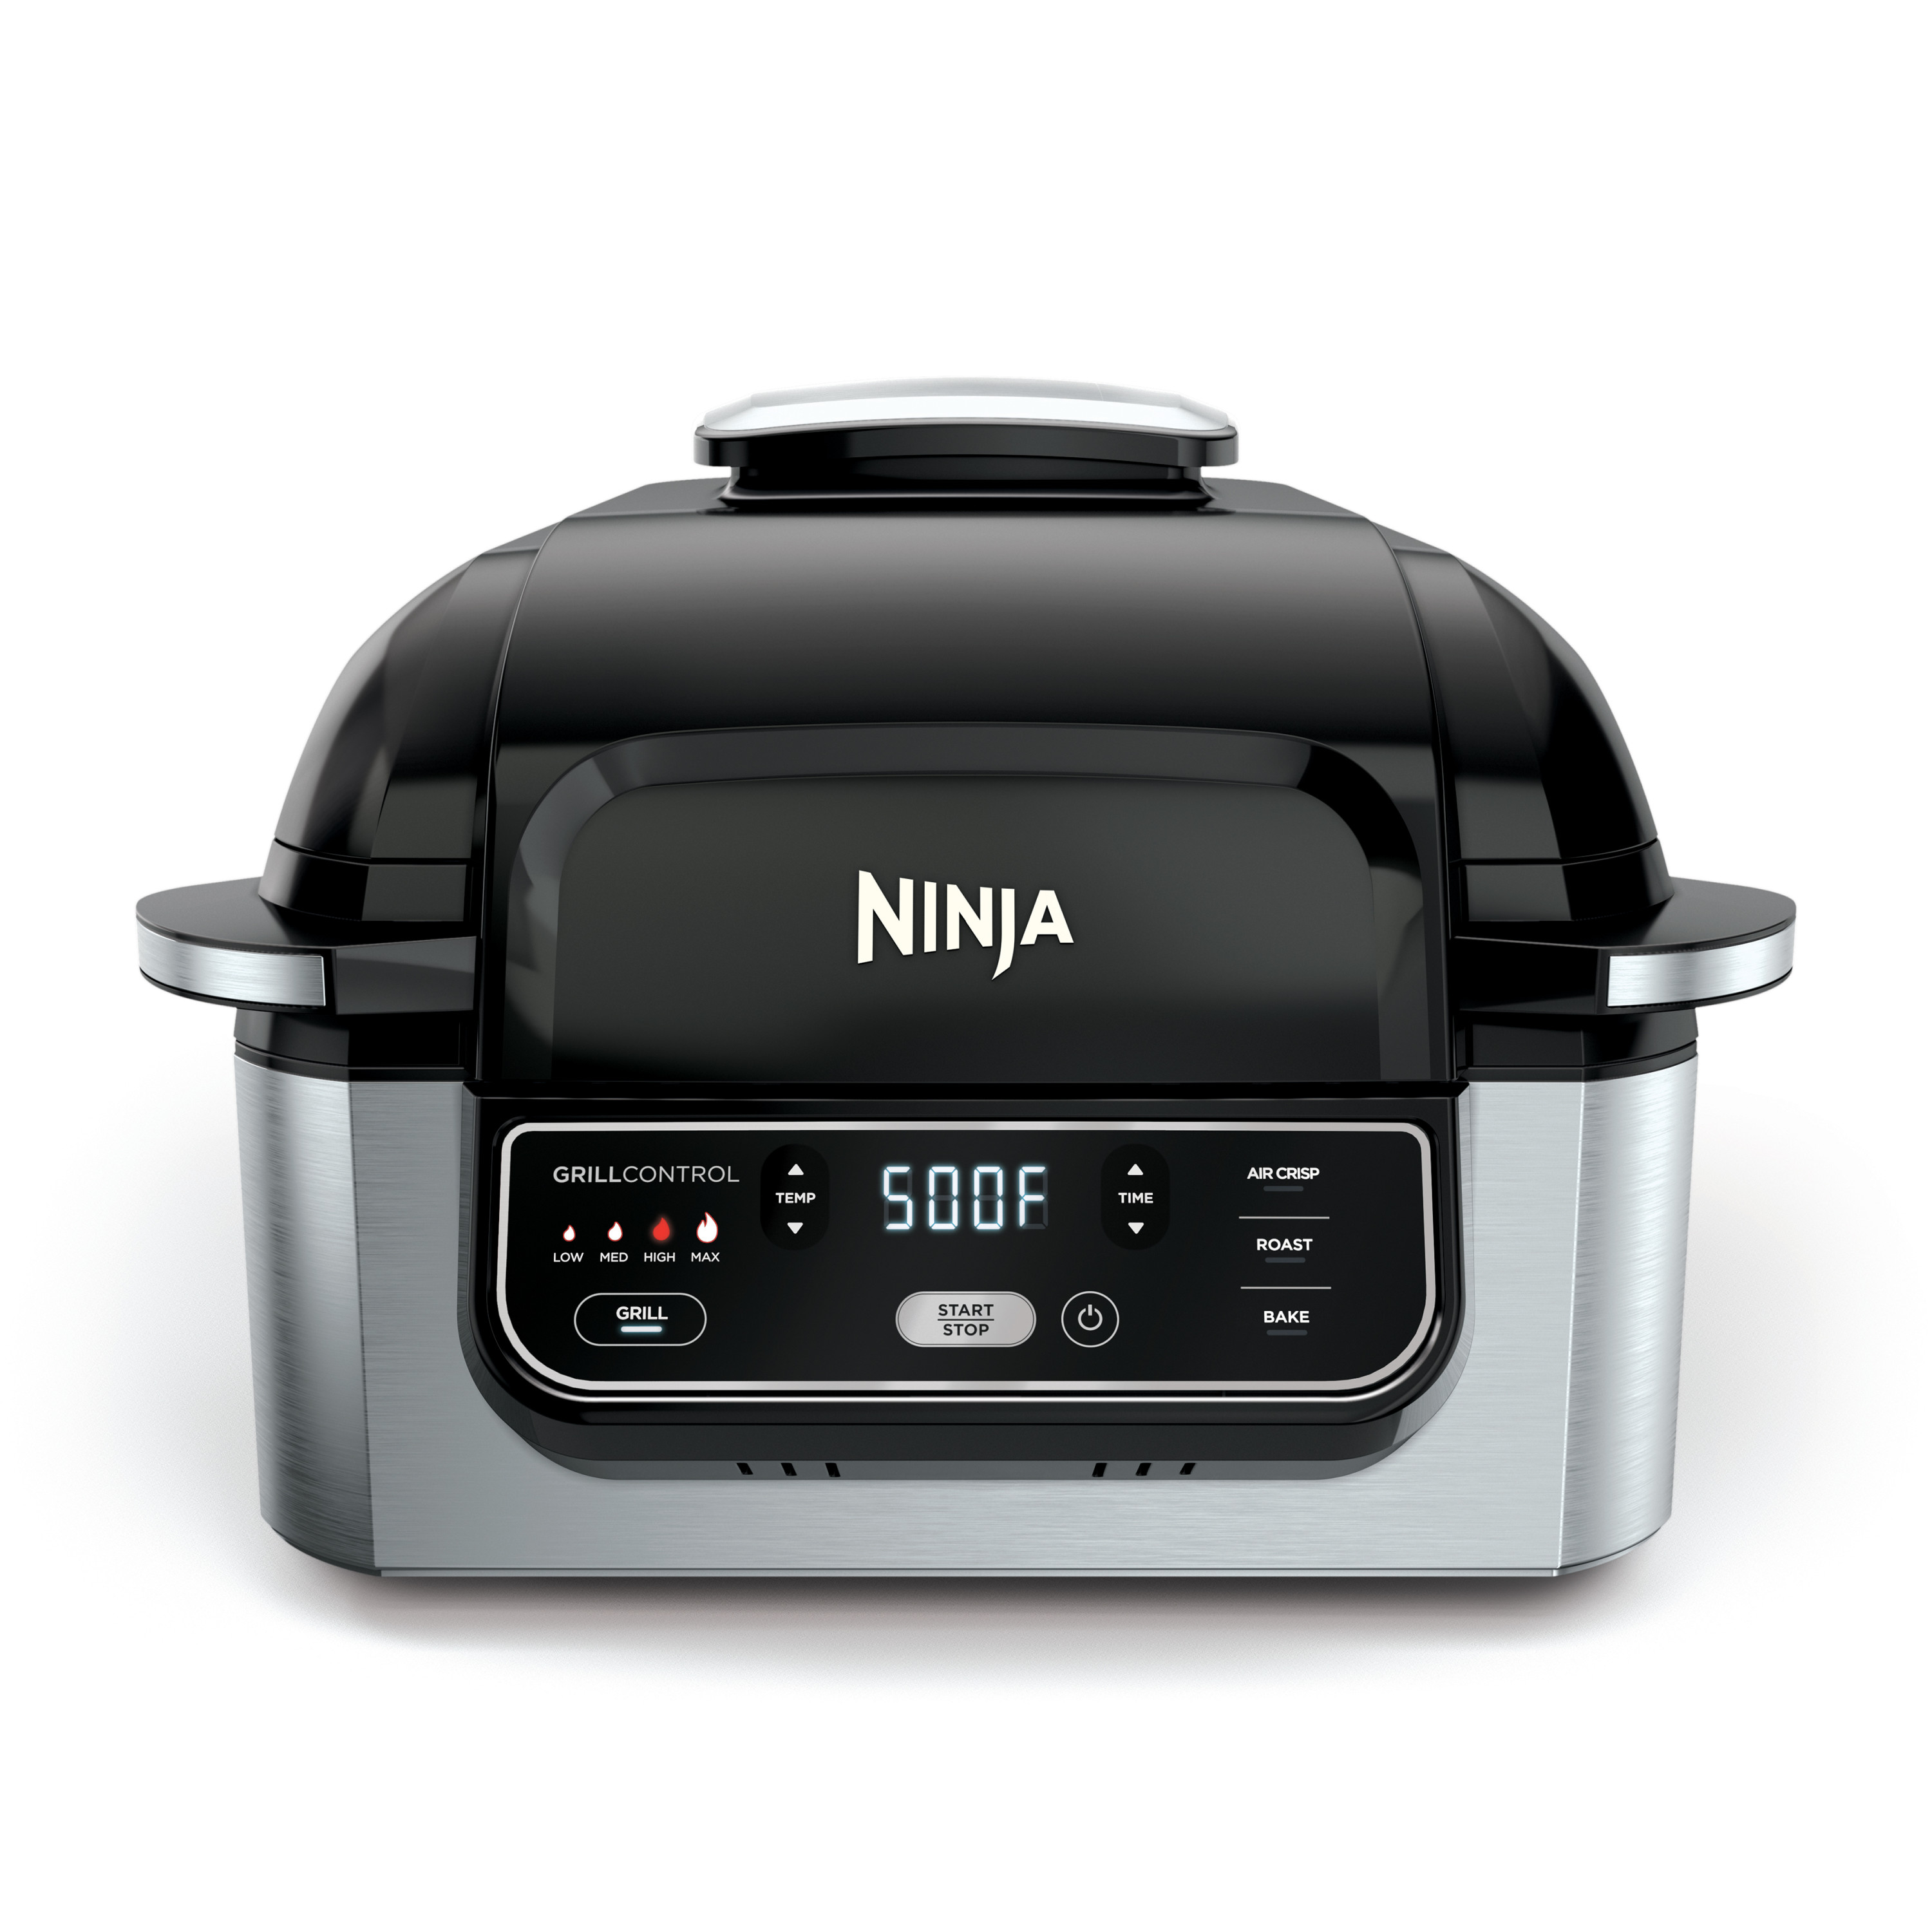 Ninja Foodi 4-in-1 Indoor Grill with 4-qt Air Fryer, Roast, Bake, and Cyclonic Grilling Technology, Black/Stainless AG300 - image 1 of 9